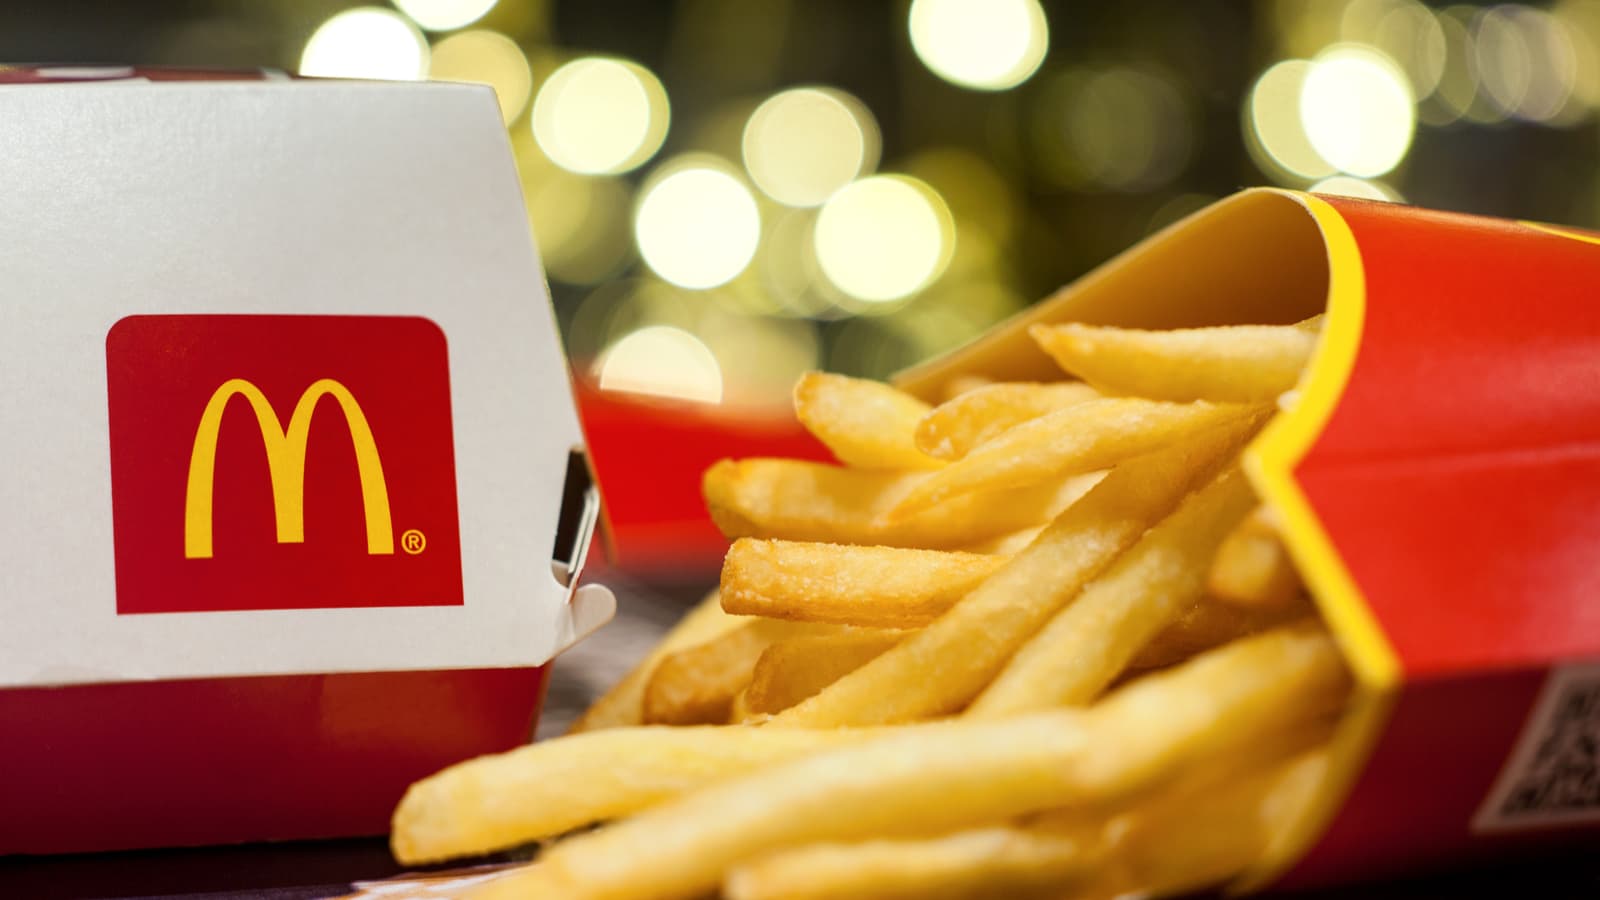 A McDonald's (MCD stock) burger box and fries rest on a flat surface.